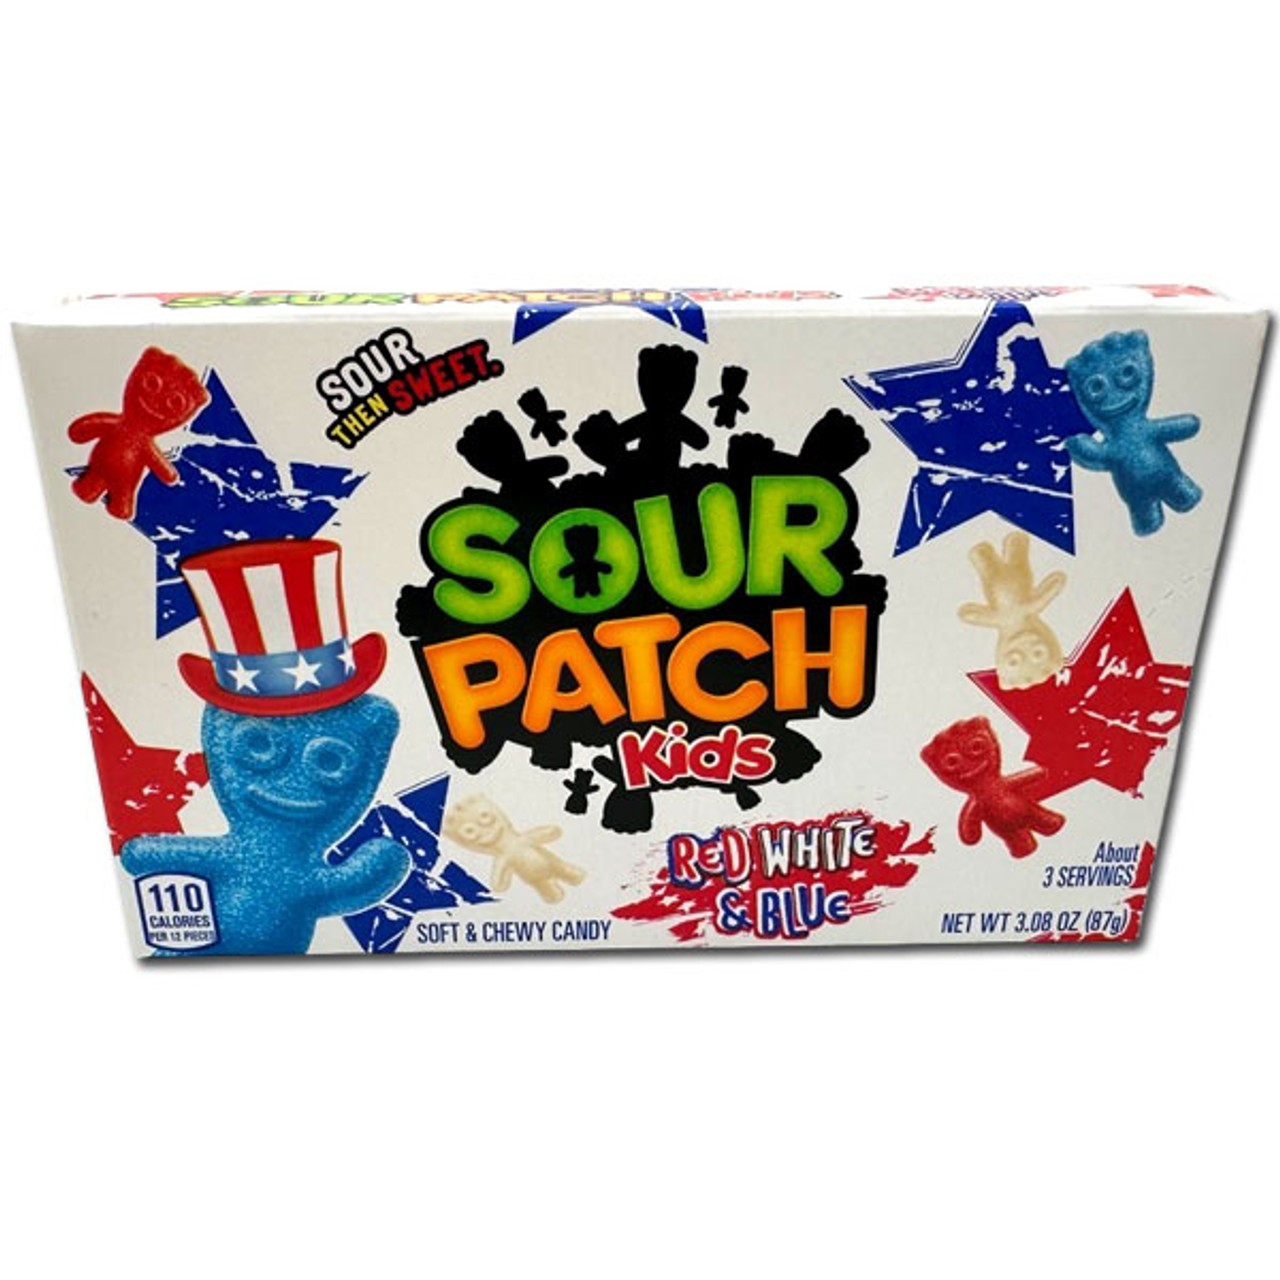 Sour Patch Kids Red White & Blue Soft & Chewy Candy, 3.08 oz - Jay C Food  Stores